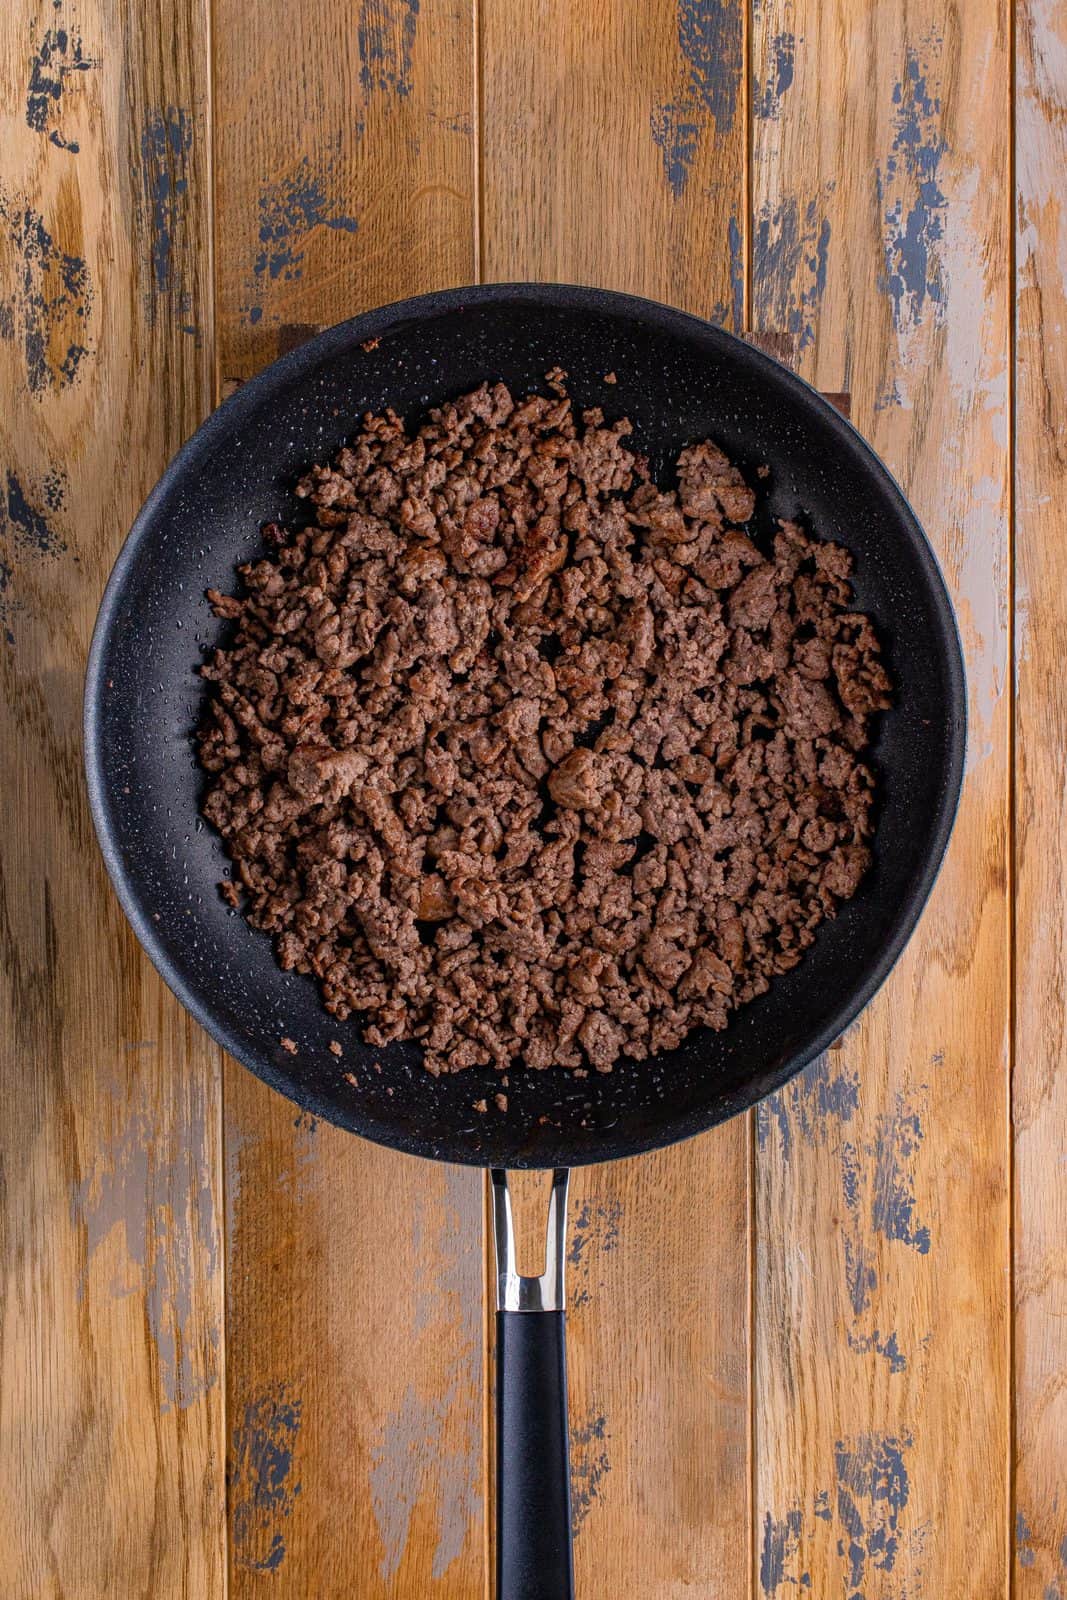 browning the ground beef in a large skillet.